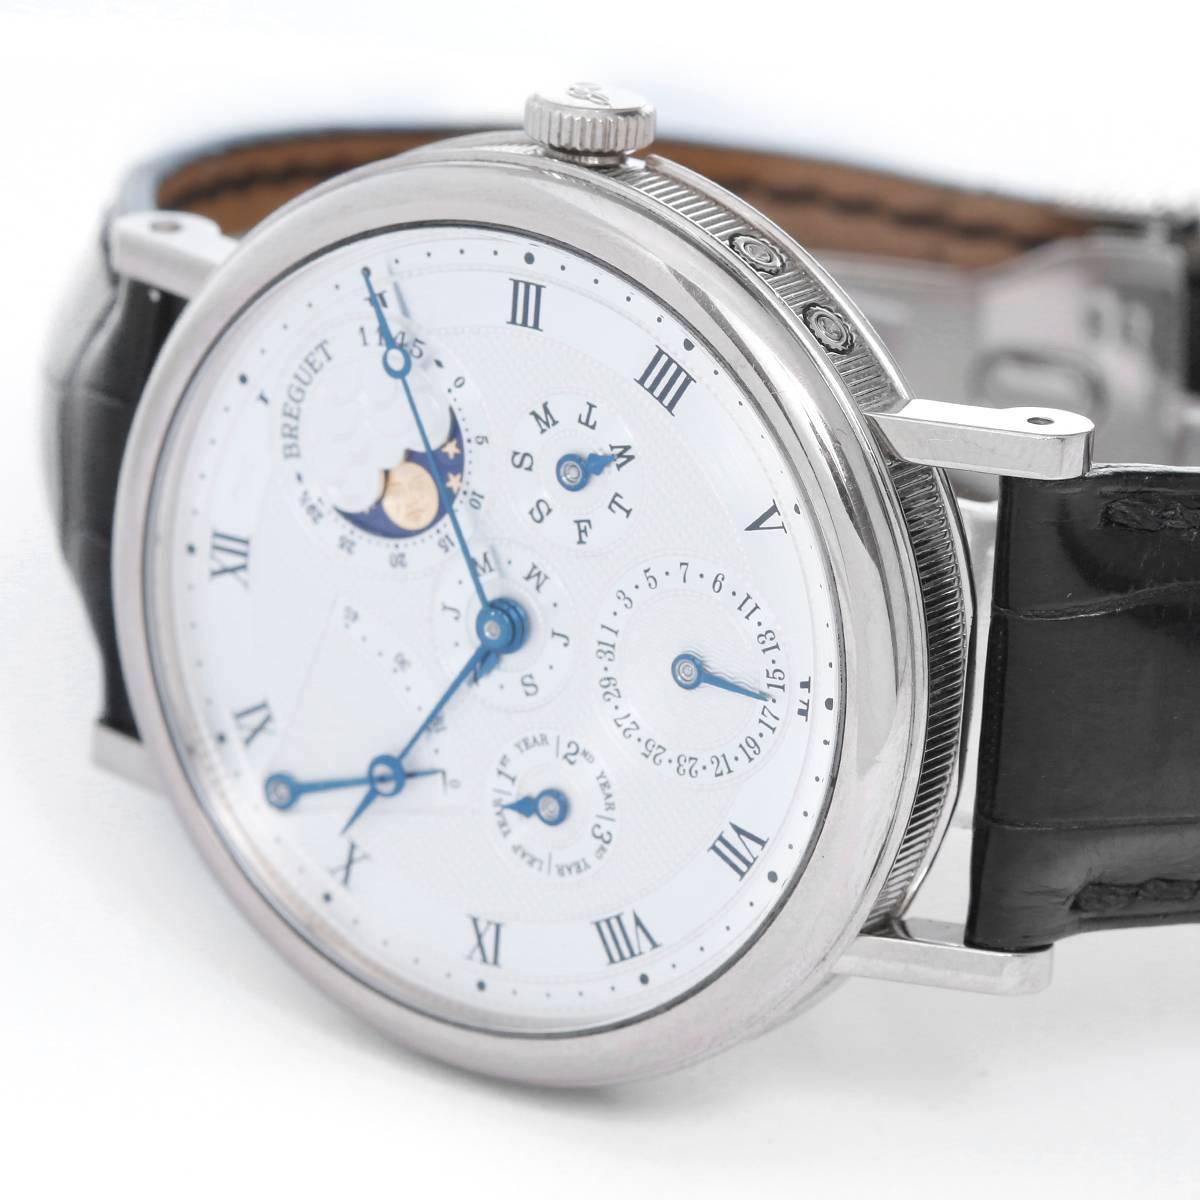 Breguet Perpetual Calendar Power Reserve Men's 18k White Watch Ref. 5327BB/1E/986 (or 5327) -  Automatic winding. 18k white gold case with exposition back  (39mm diameter). 2-Tone silvered dial with black Roman numerals; day, date, month, moonphase;